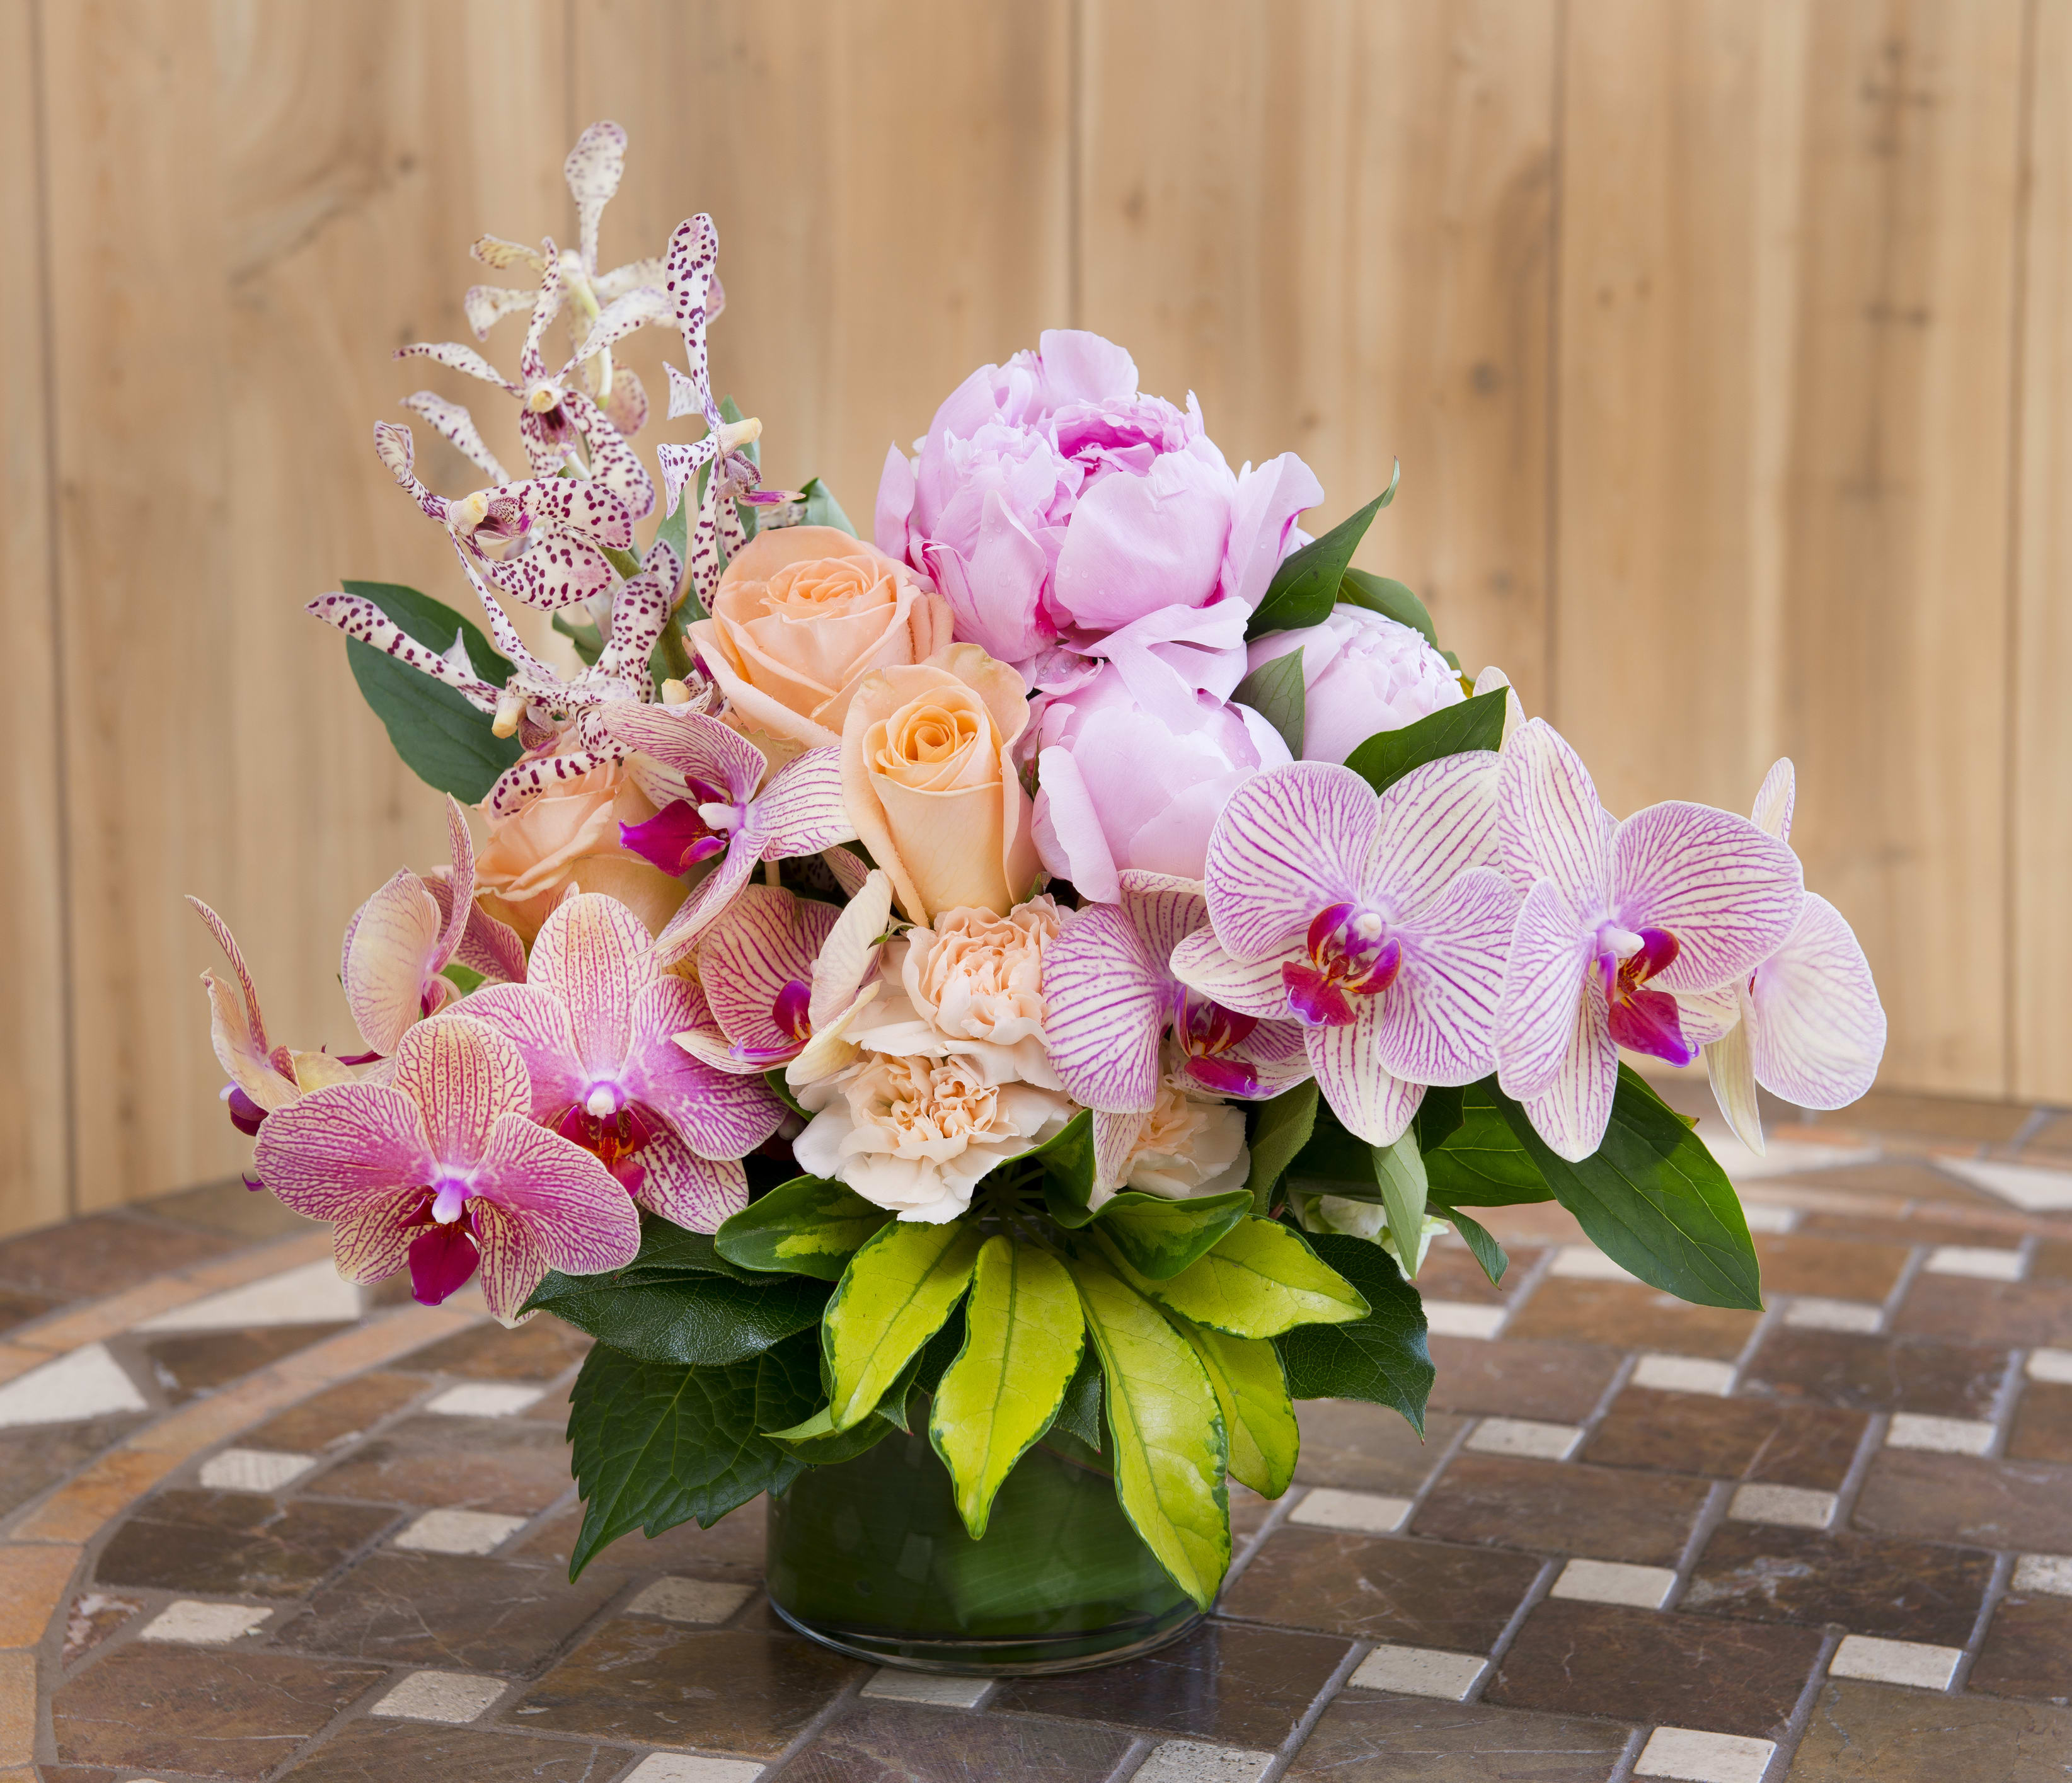 Soft Embrace  - Mixed colored orchids accented with peach roses and light pink peonies. (TEF-004)